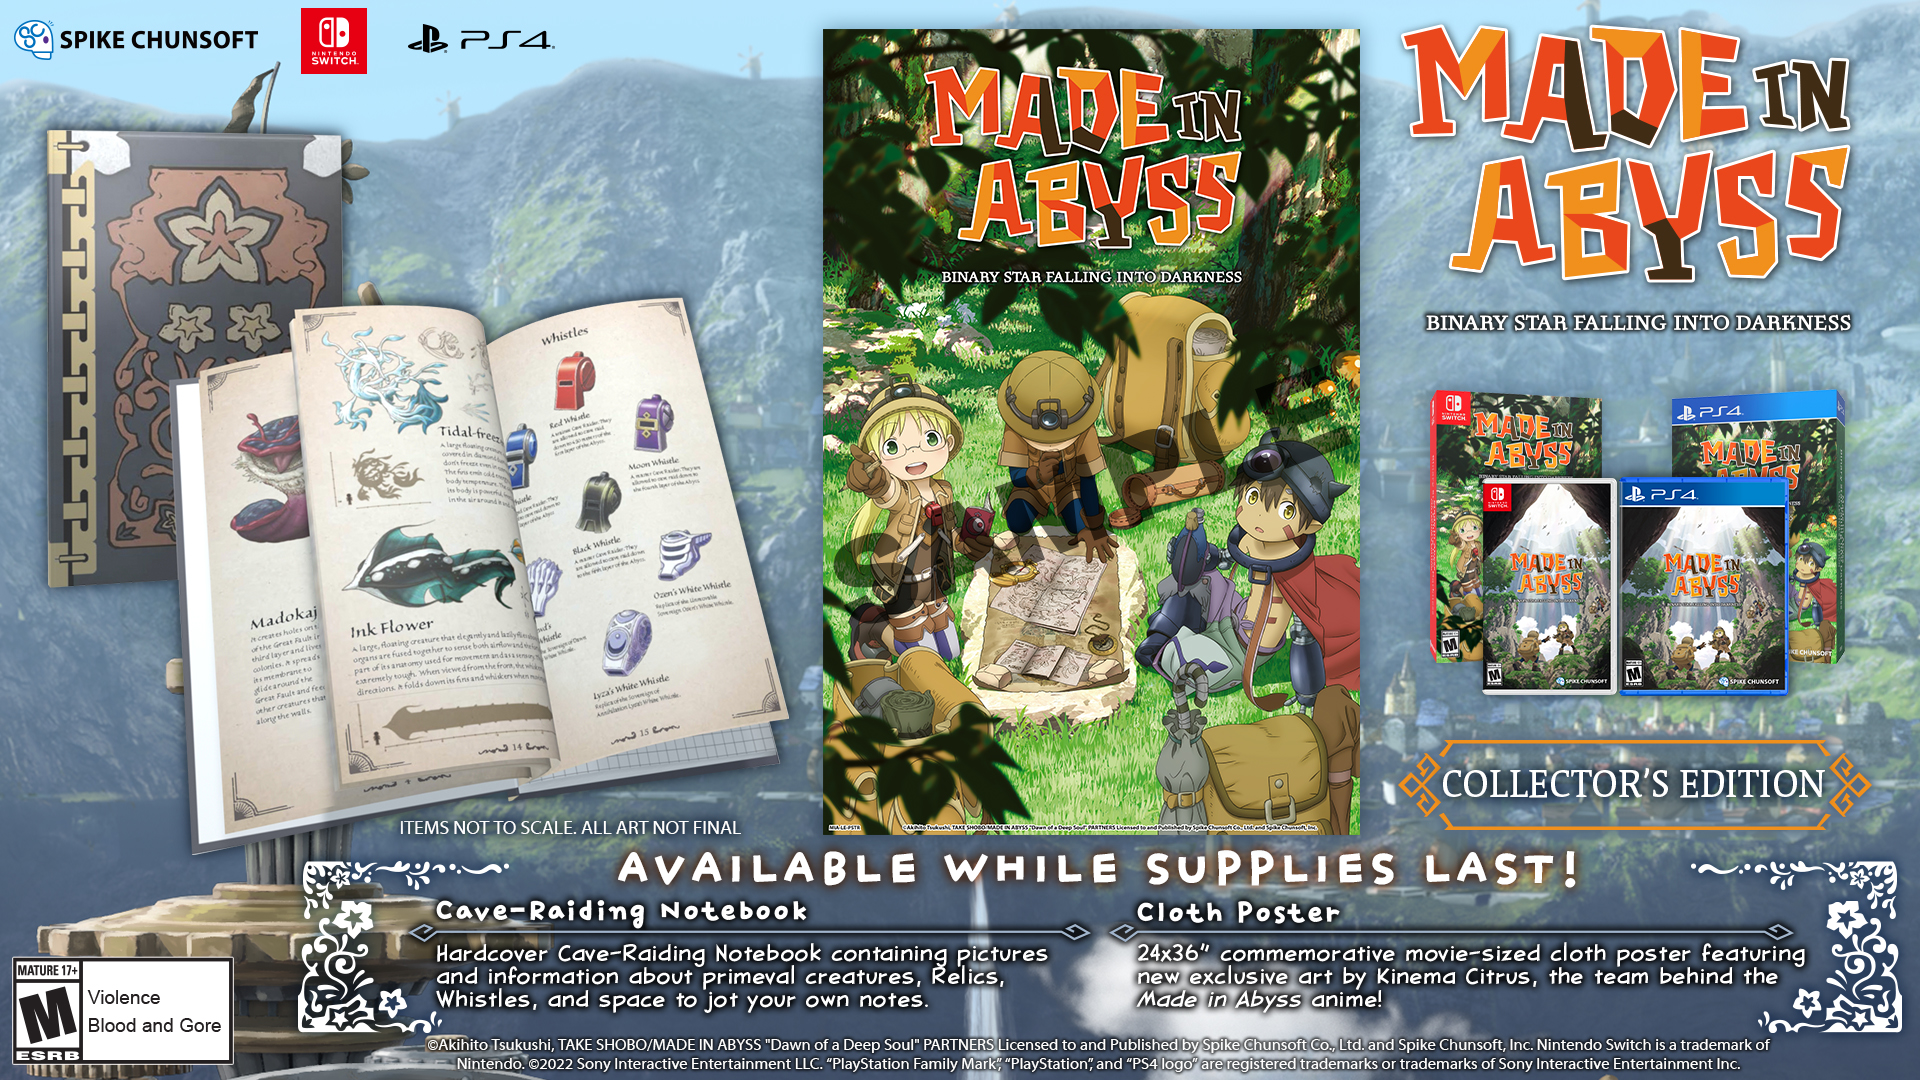 Made in Abyss: Dawn of the Deep Soul Movie Gets New Trailer